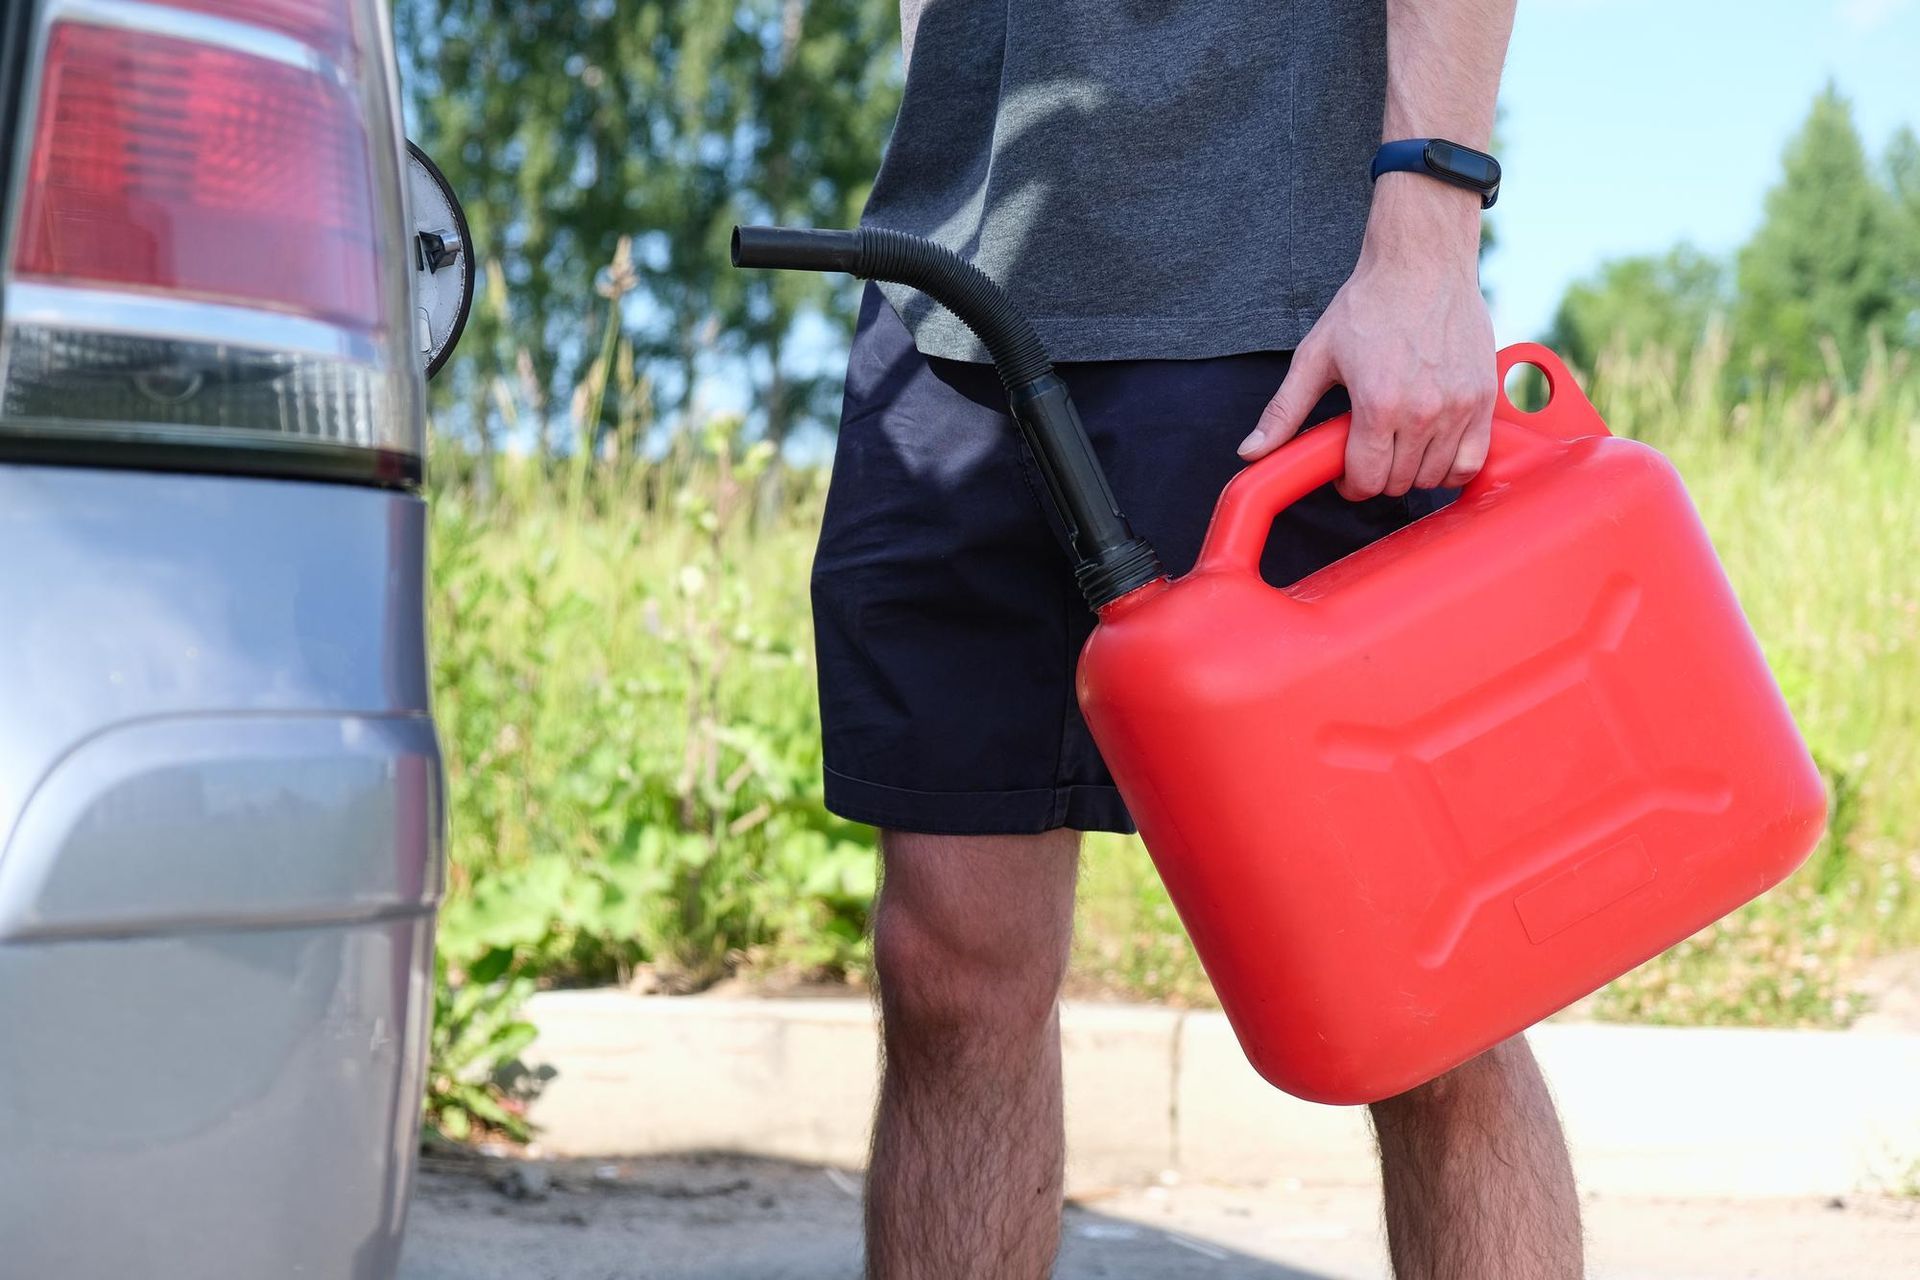 A man is holding a red gas can next to a car.